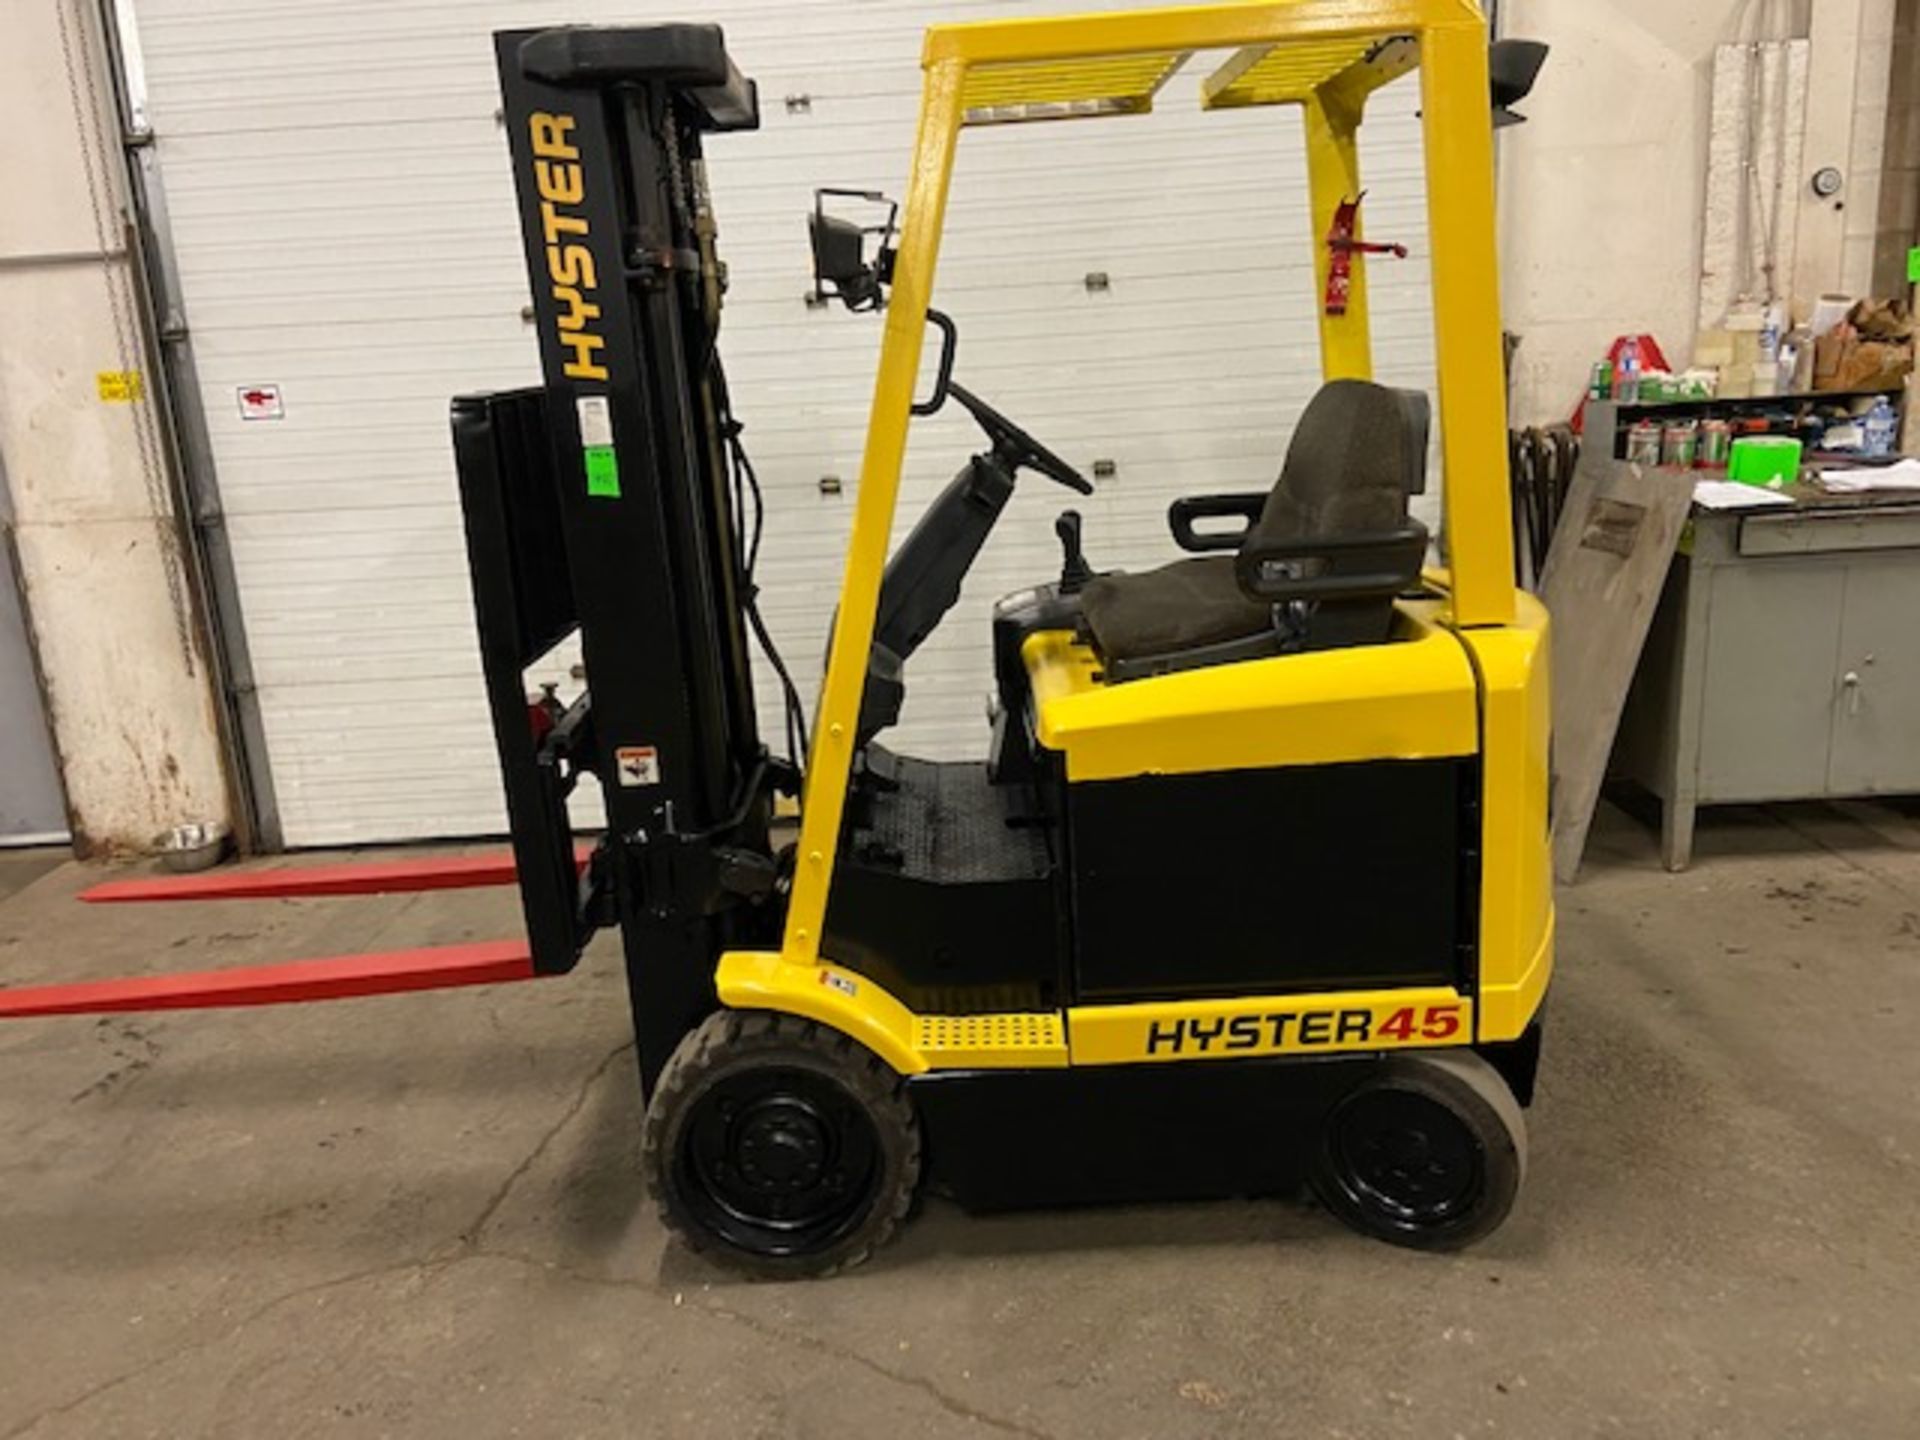 FREE CUSTOMS - Hyster 4500lbs Capacity Forklift Electric with 3-STAGE MAST with sideshift & LOW